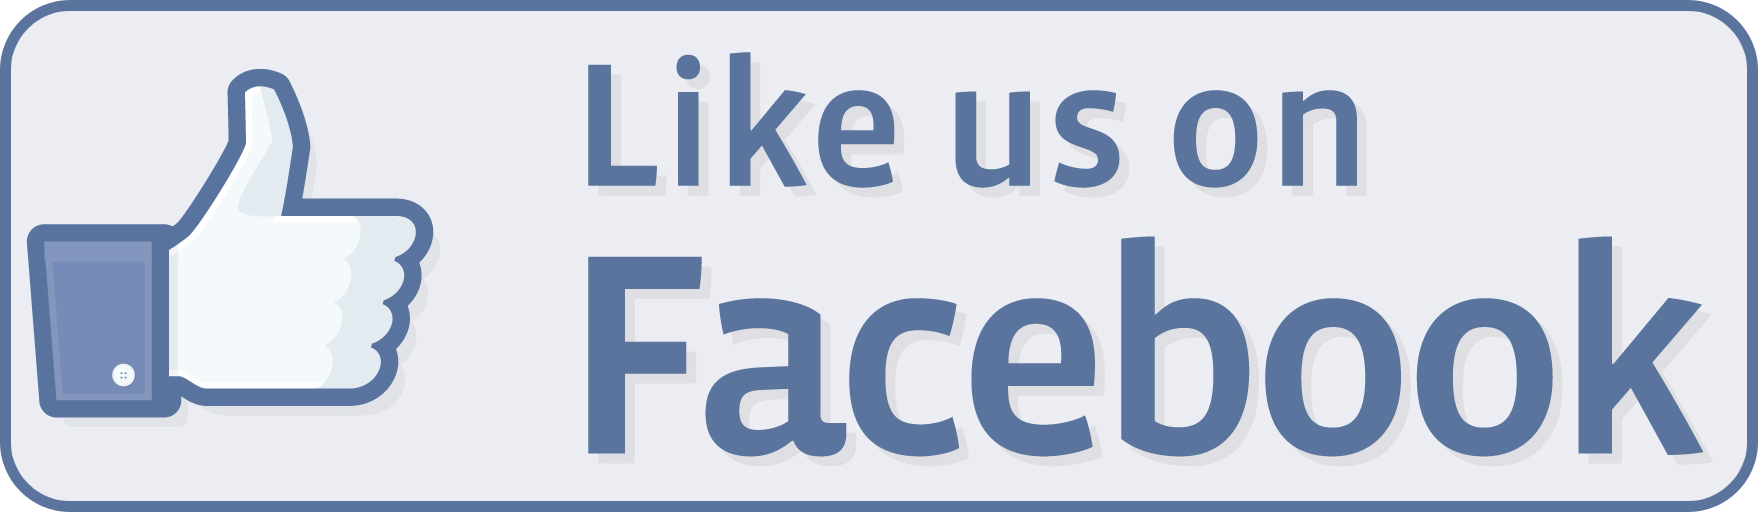 like-us-on-facebook.png